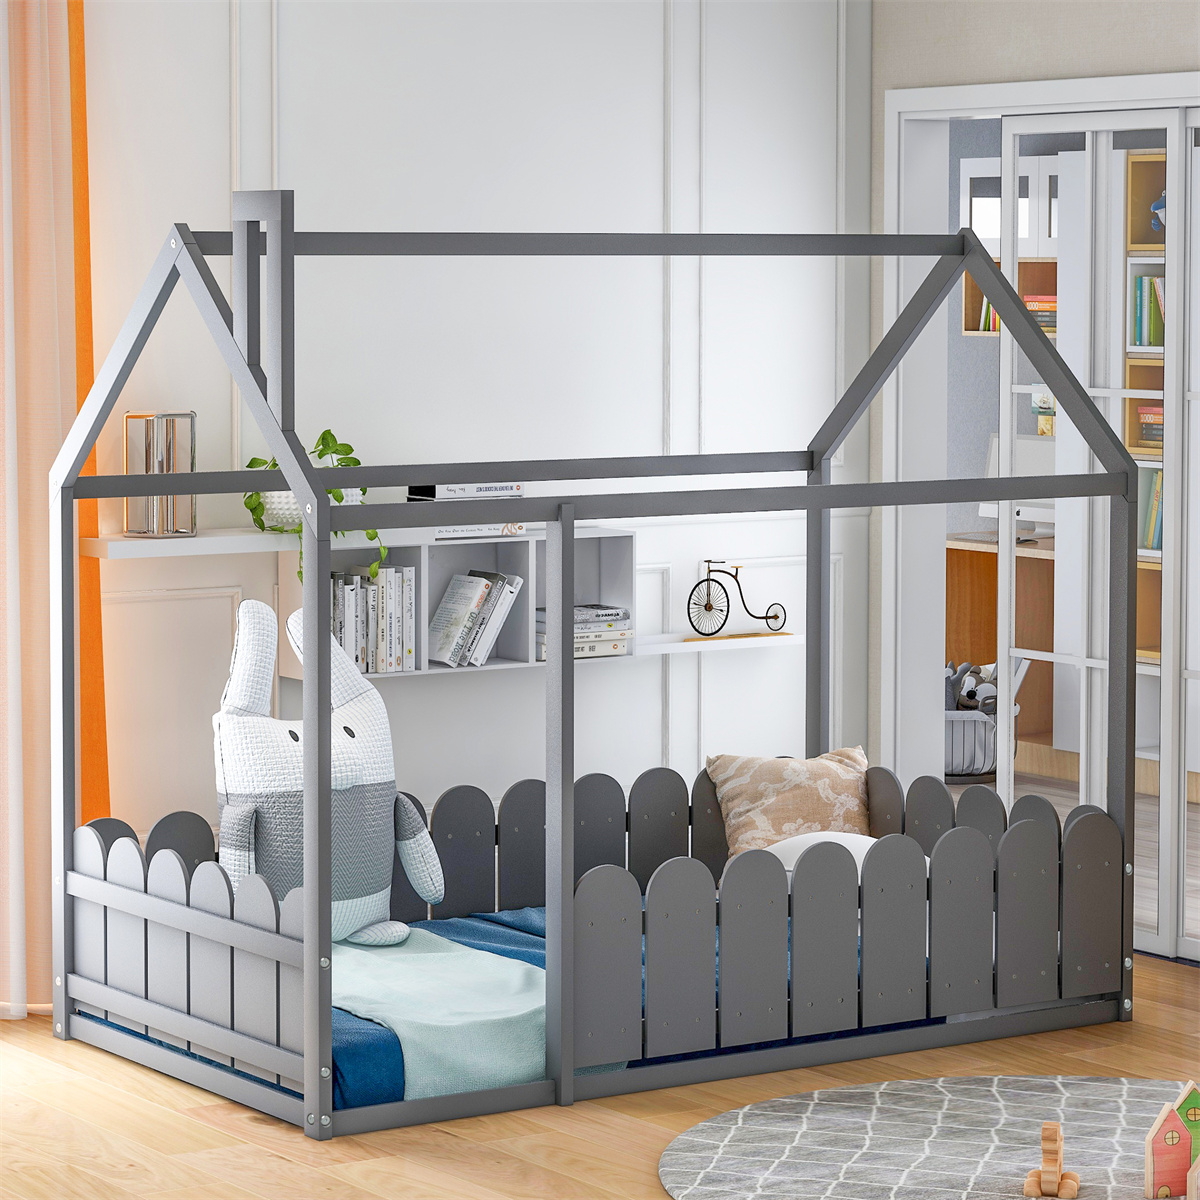 JINS&VICO Twin Size House Bed with Fence, Wood Low Bed Frame with Decorative Roof and Chimney, Playhouse Design Twin Bed for Teens Boys and Girls, Slats are Not Included, Gray - image 1 of 6